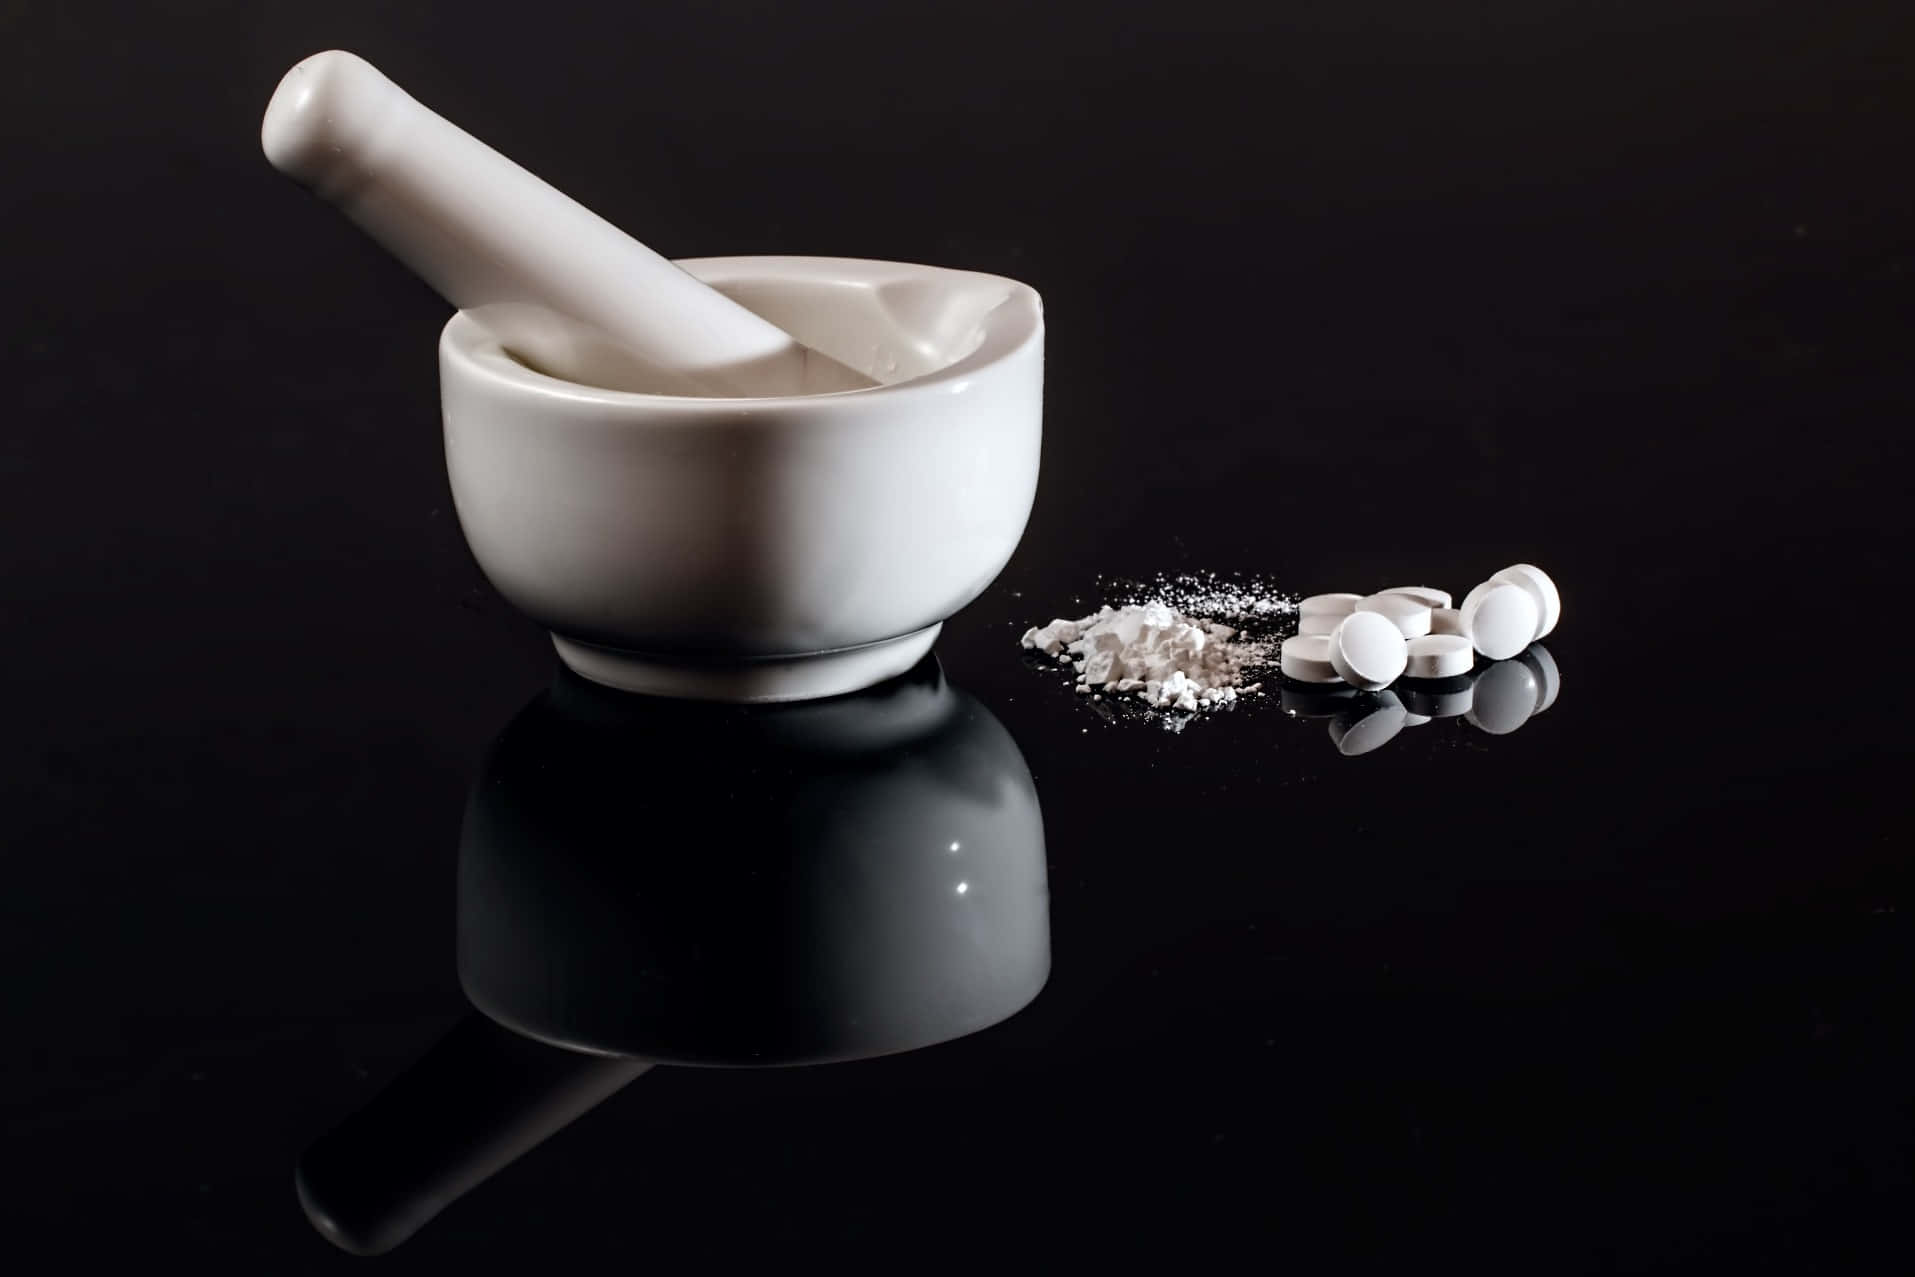 A Mortar And Pestle With Some Pills